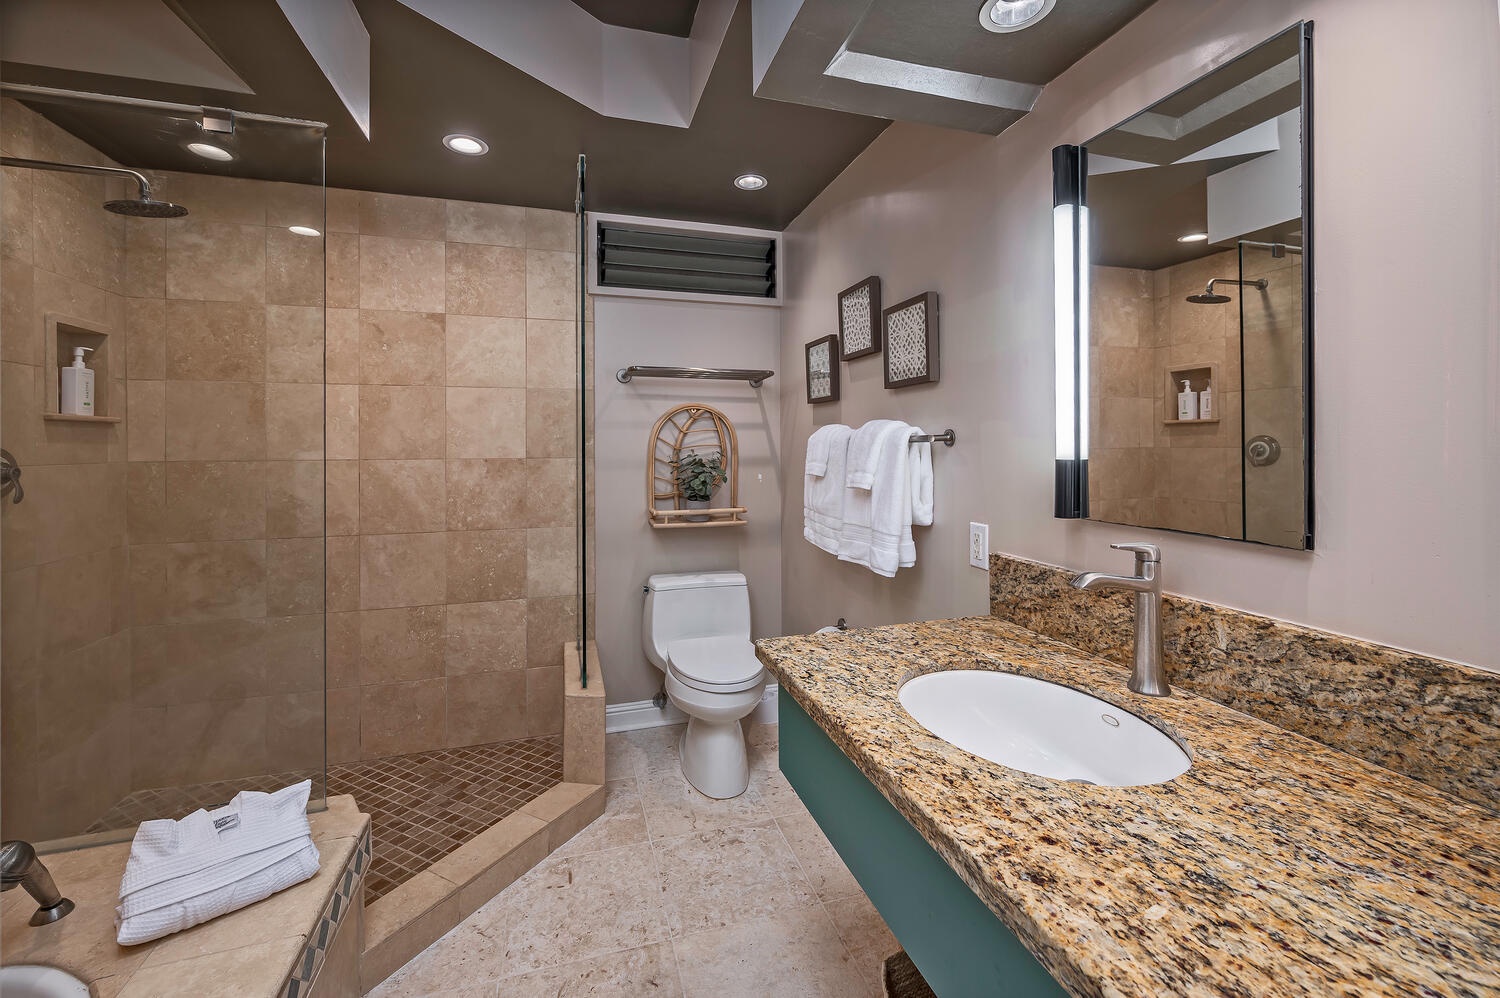 Kailua Vacation Rentals, Hale Lani - Guest bathroom with single vanity and walk-in shower